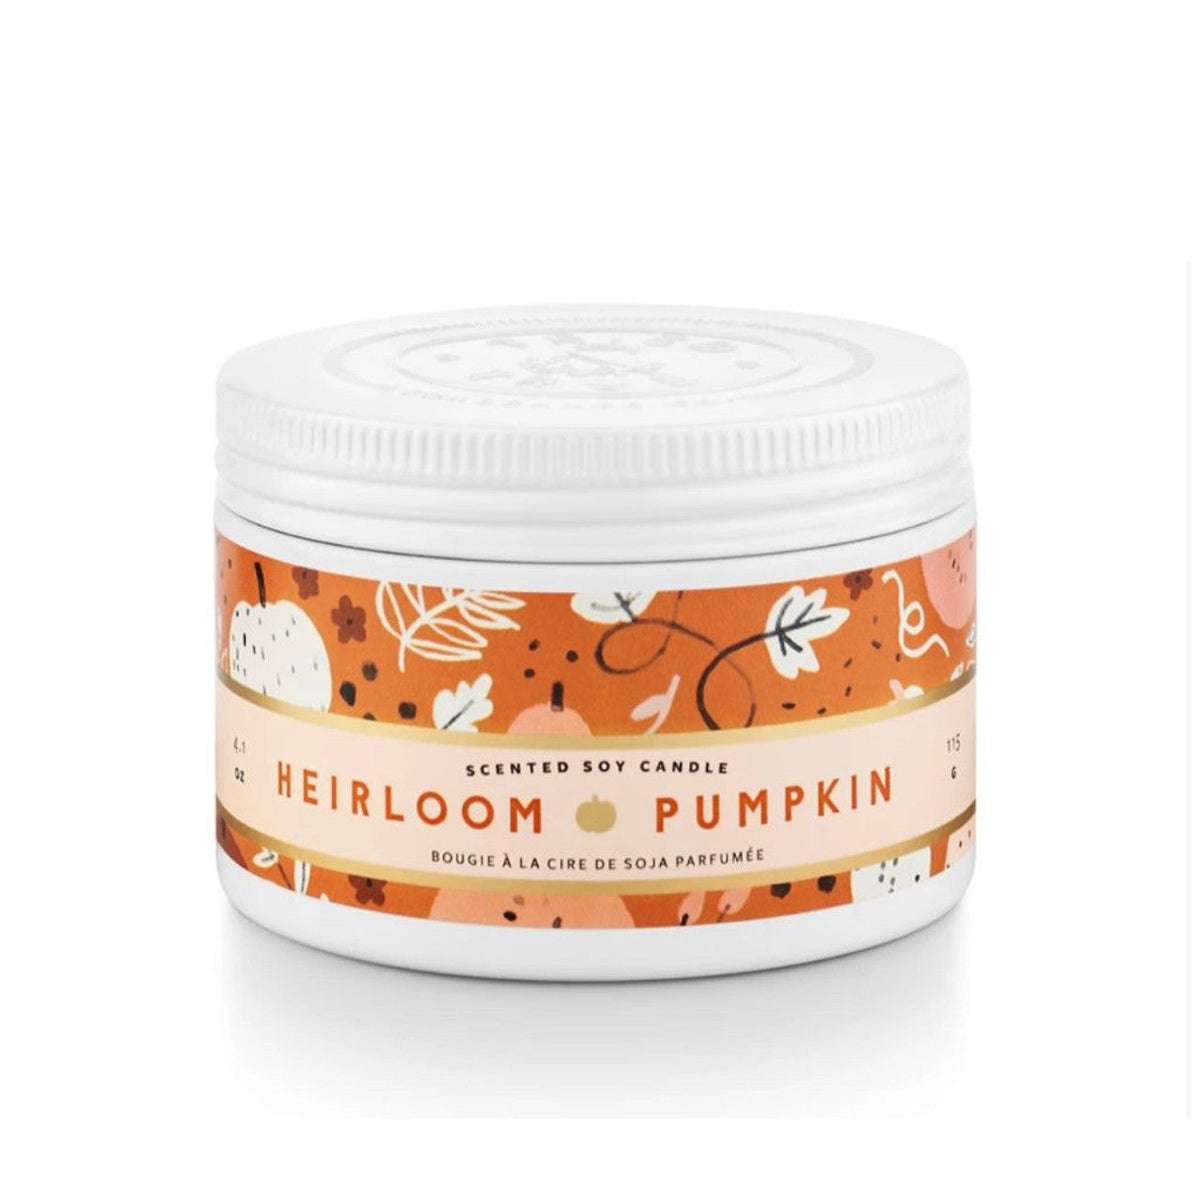 Heirloom Pumpkin Small Tried & True Tin Candle by Illume